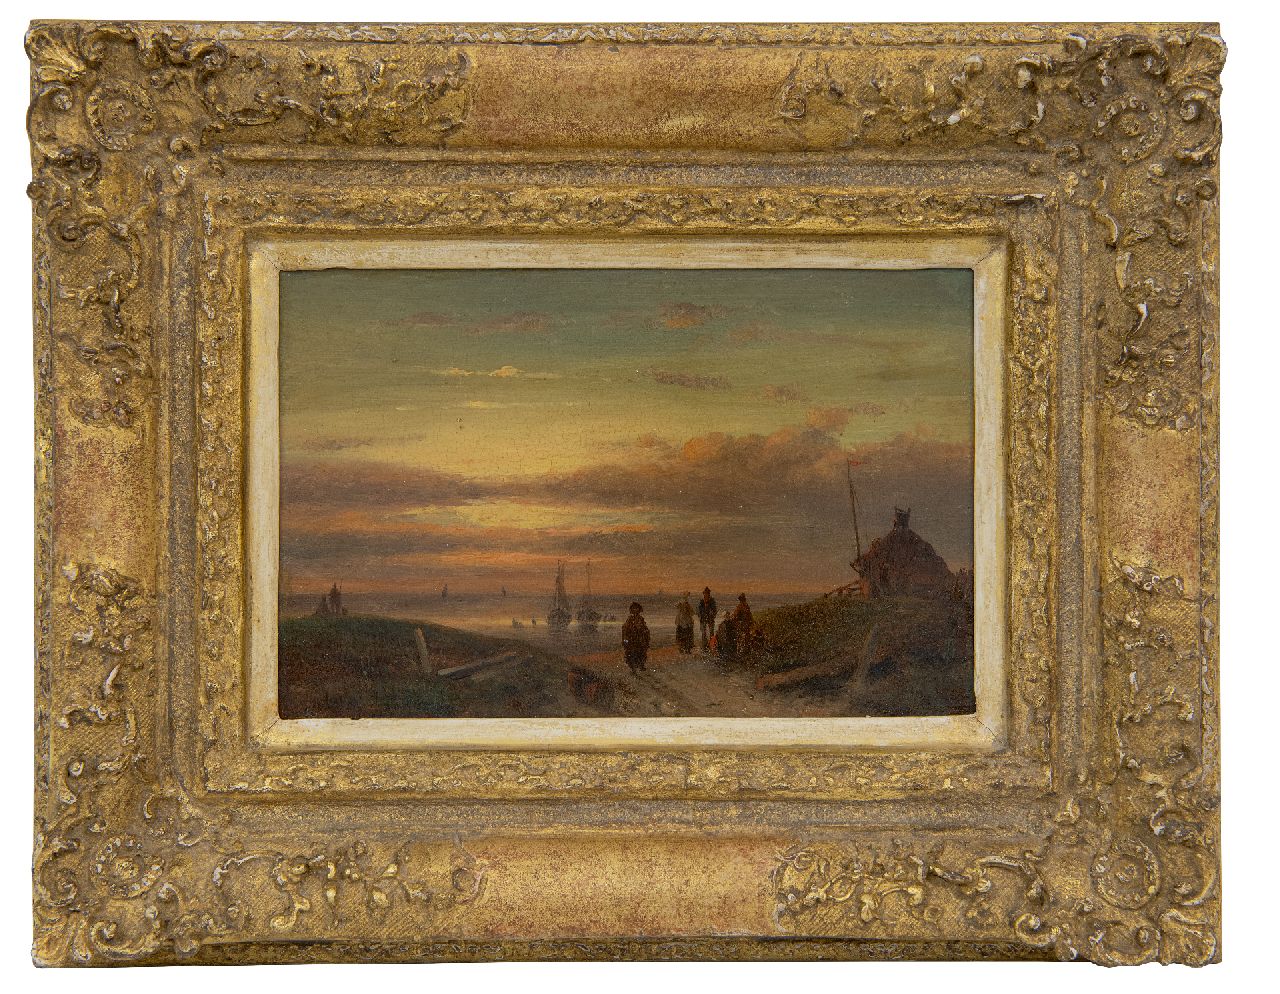 Leickert C.H.J.  | 'Charles' Henri Joseph Leickert | Paintings offered for sale | Evening landscape with fishermen near the beach, oil on panel 12.0 x 18.3 cm, signed l.l. with monogram